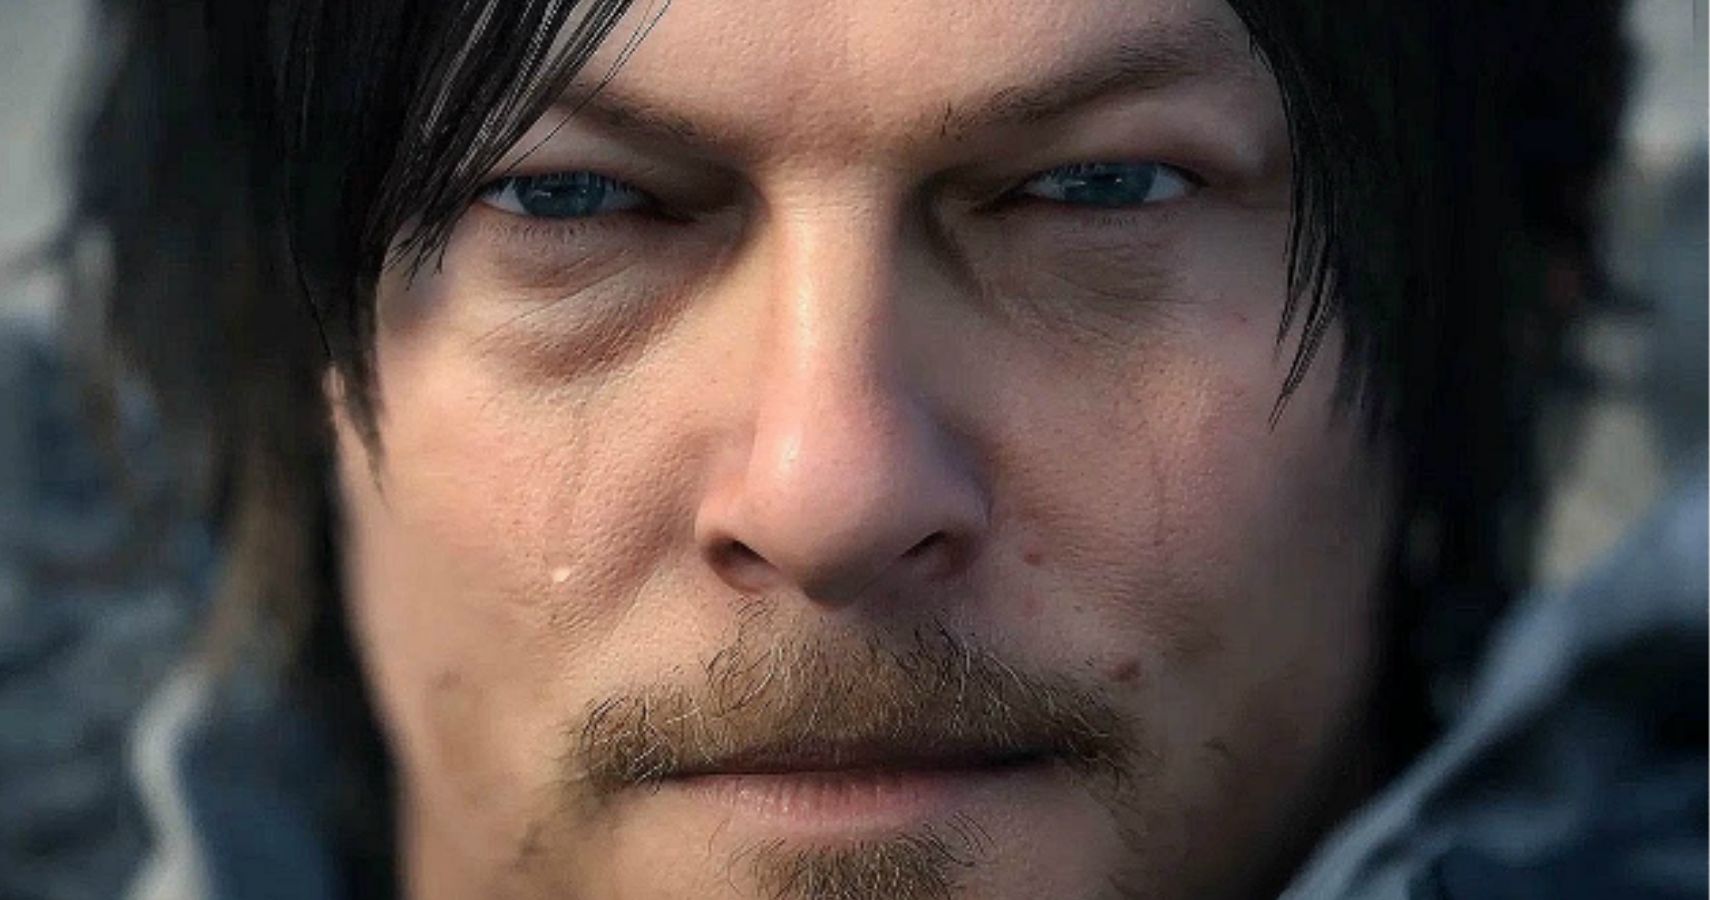 Will Death Stranding Be Any Good?